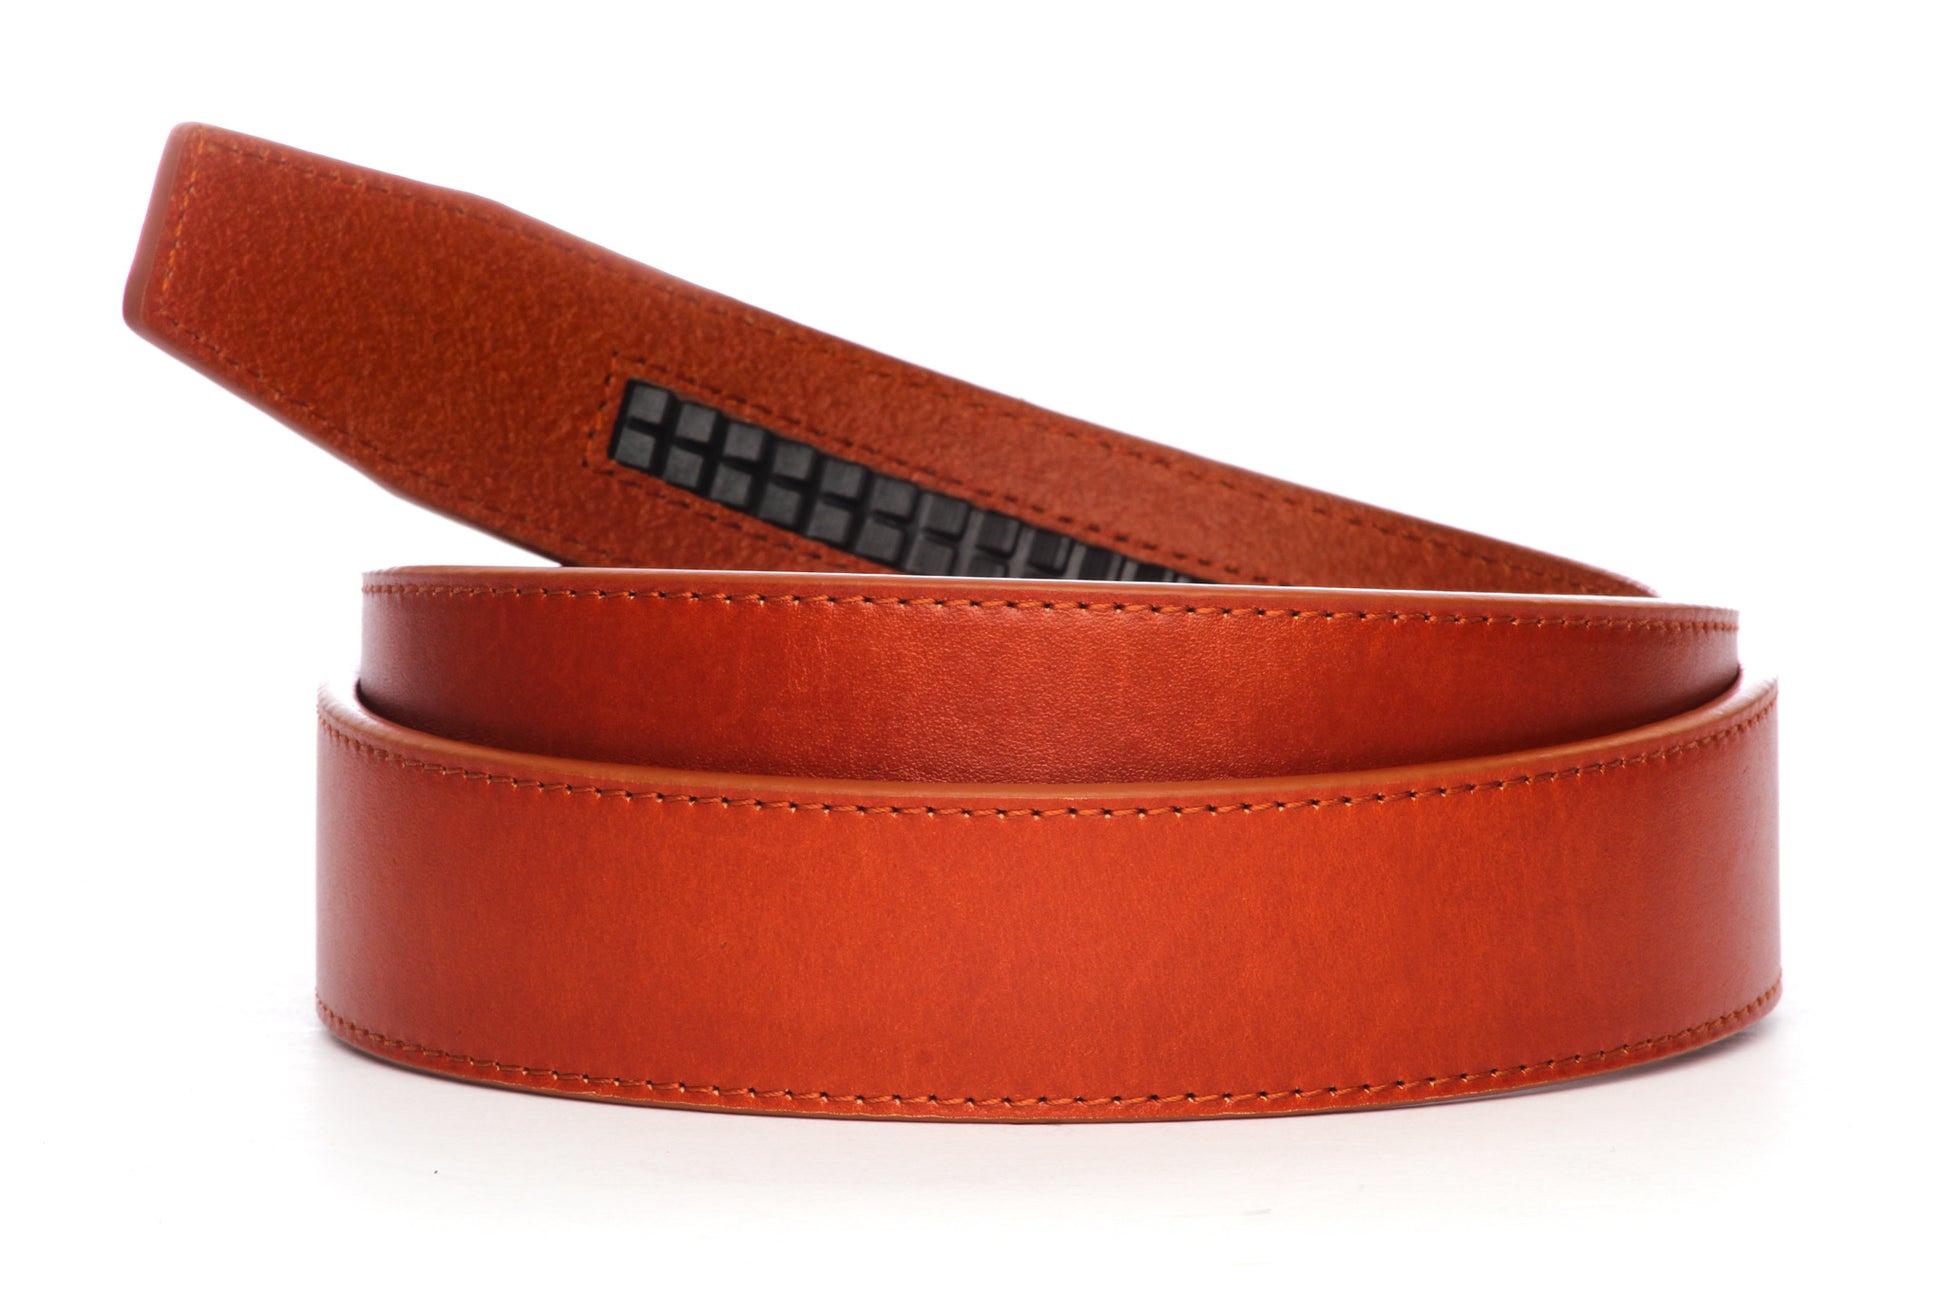 Men's leather belt strap in saddle tan vegetable tanned, 1.5 inches wide, formal look, full roll